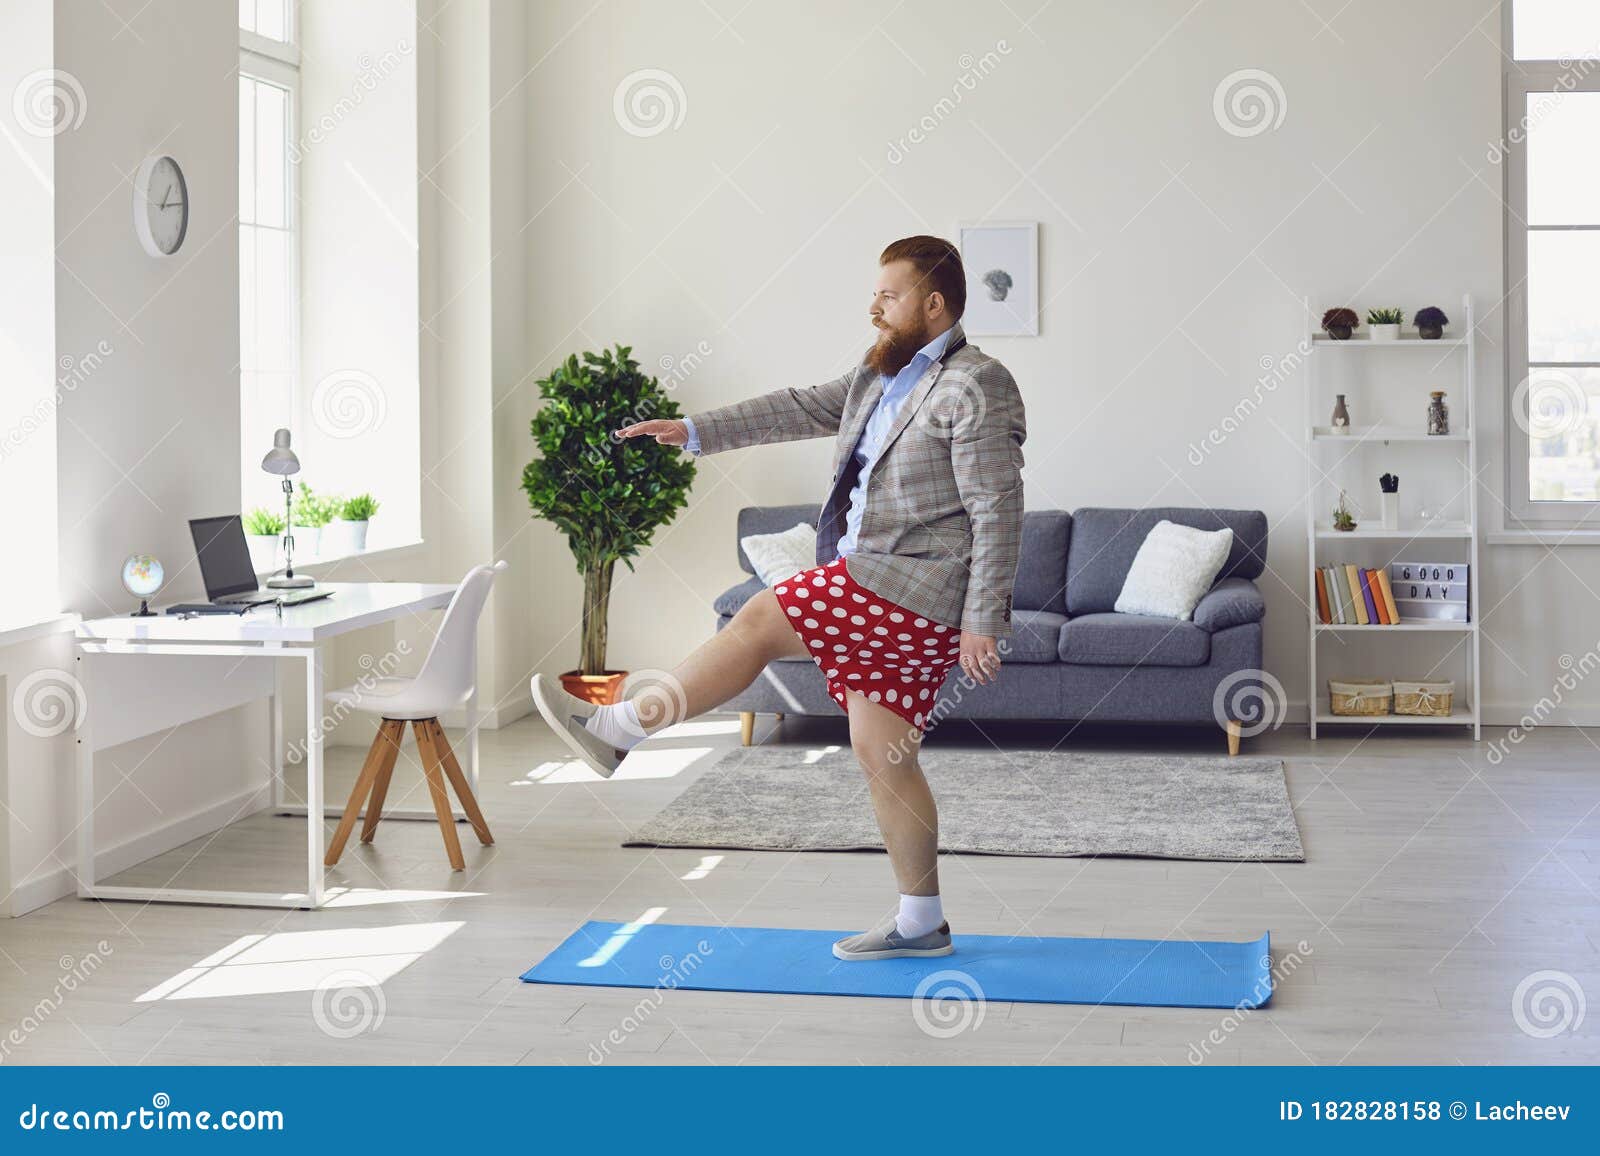 Workout Fitness Exercise Sport at Home. Funny Fat Man Doing ...